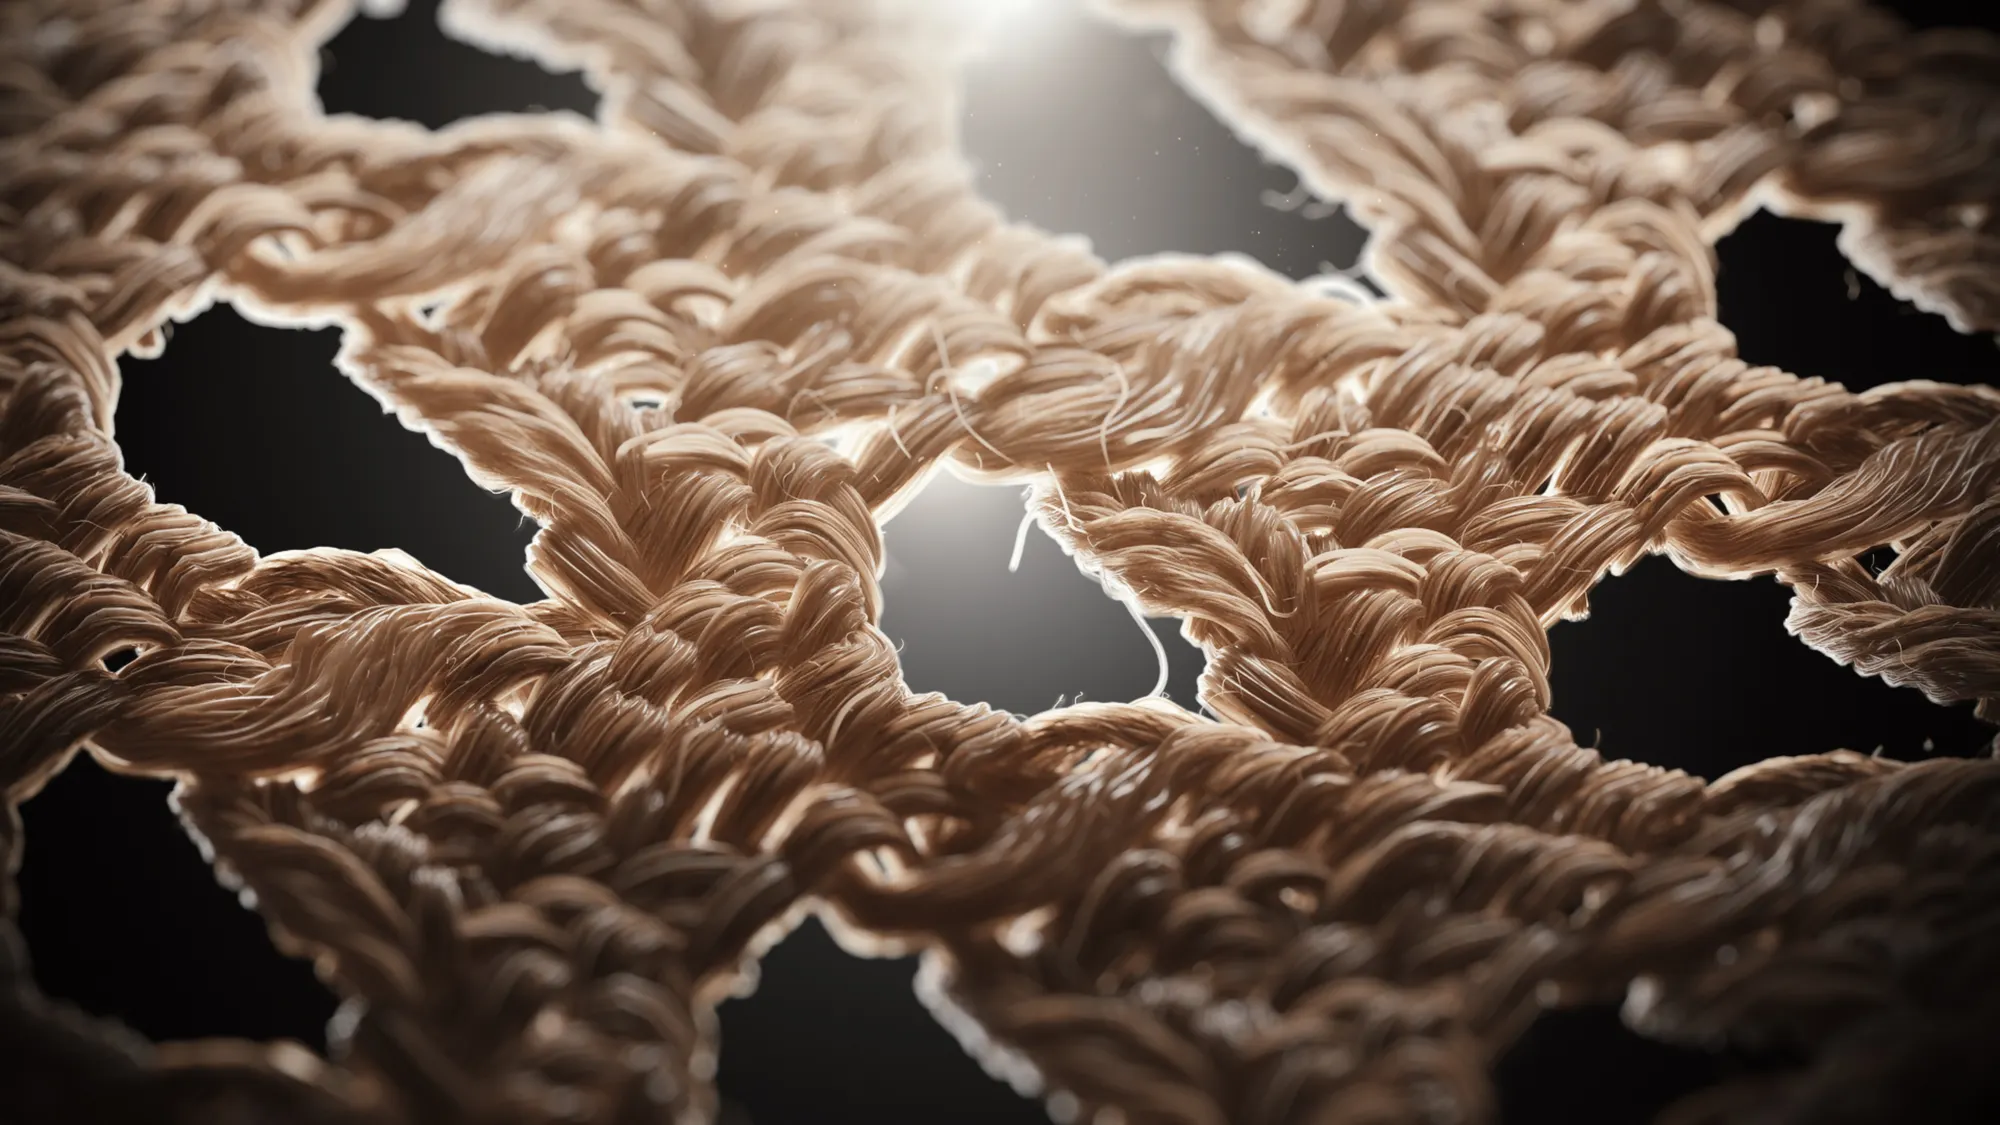 A microscopic view of a 3D model shows fine, fibrous details that contribute to the model's photorealism.